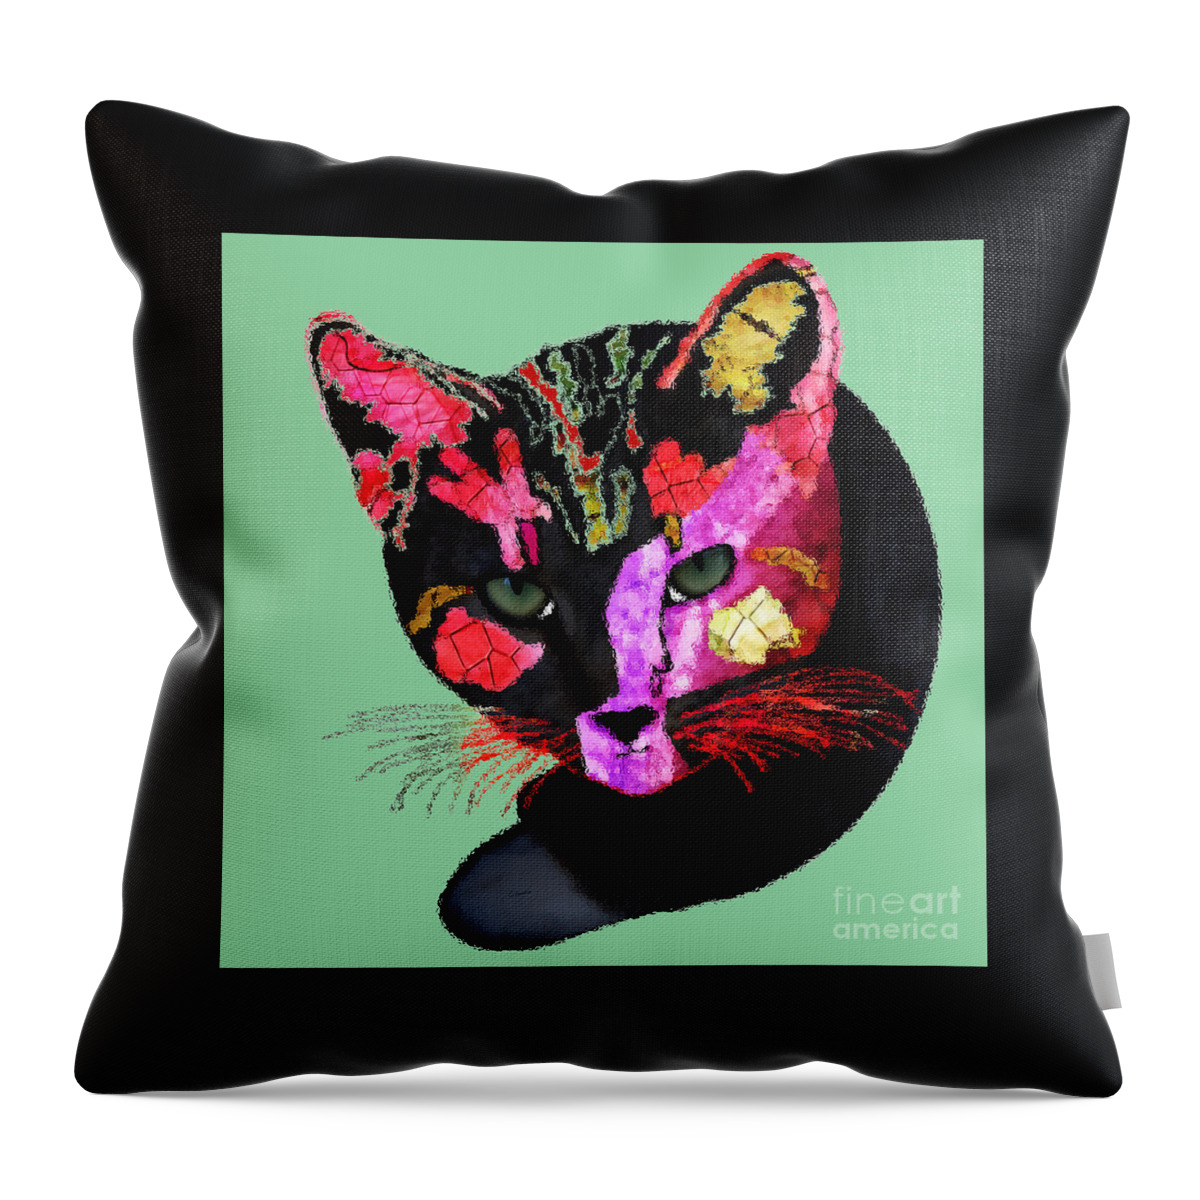 Colorful Cal Throw Pillow featuring the digital art Colorful Cat Abstract Artwork by Claudia Ellis by Claudia Ellis